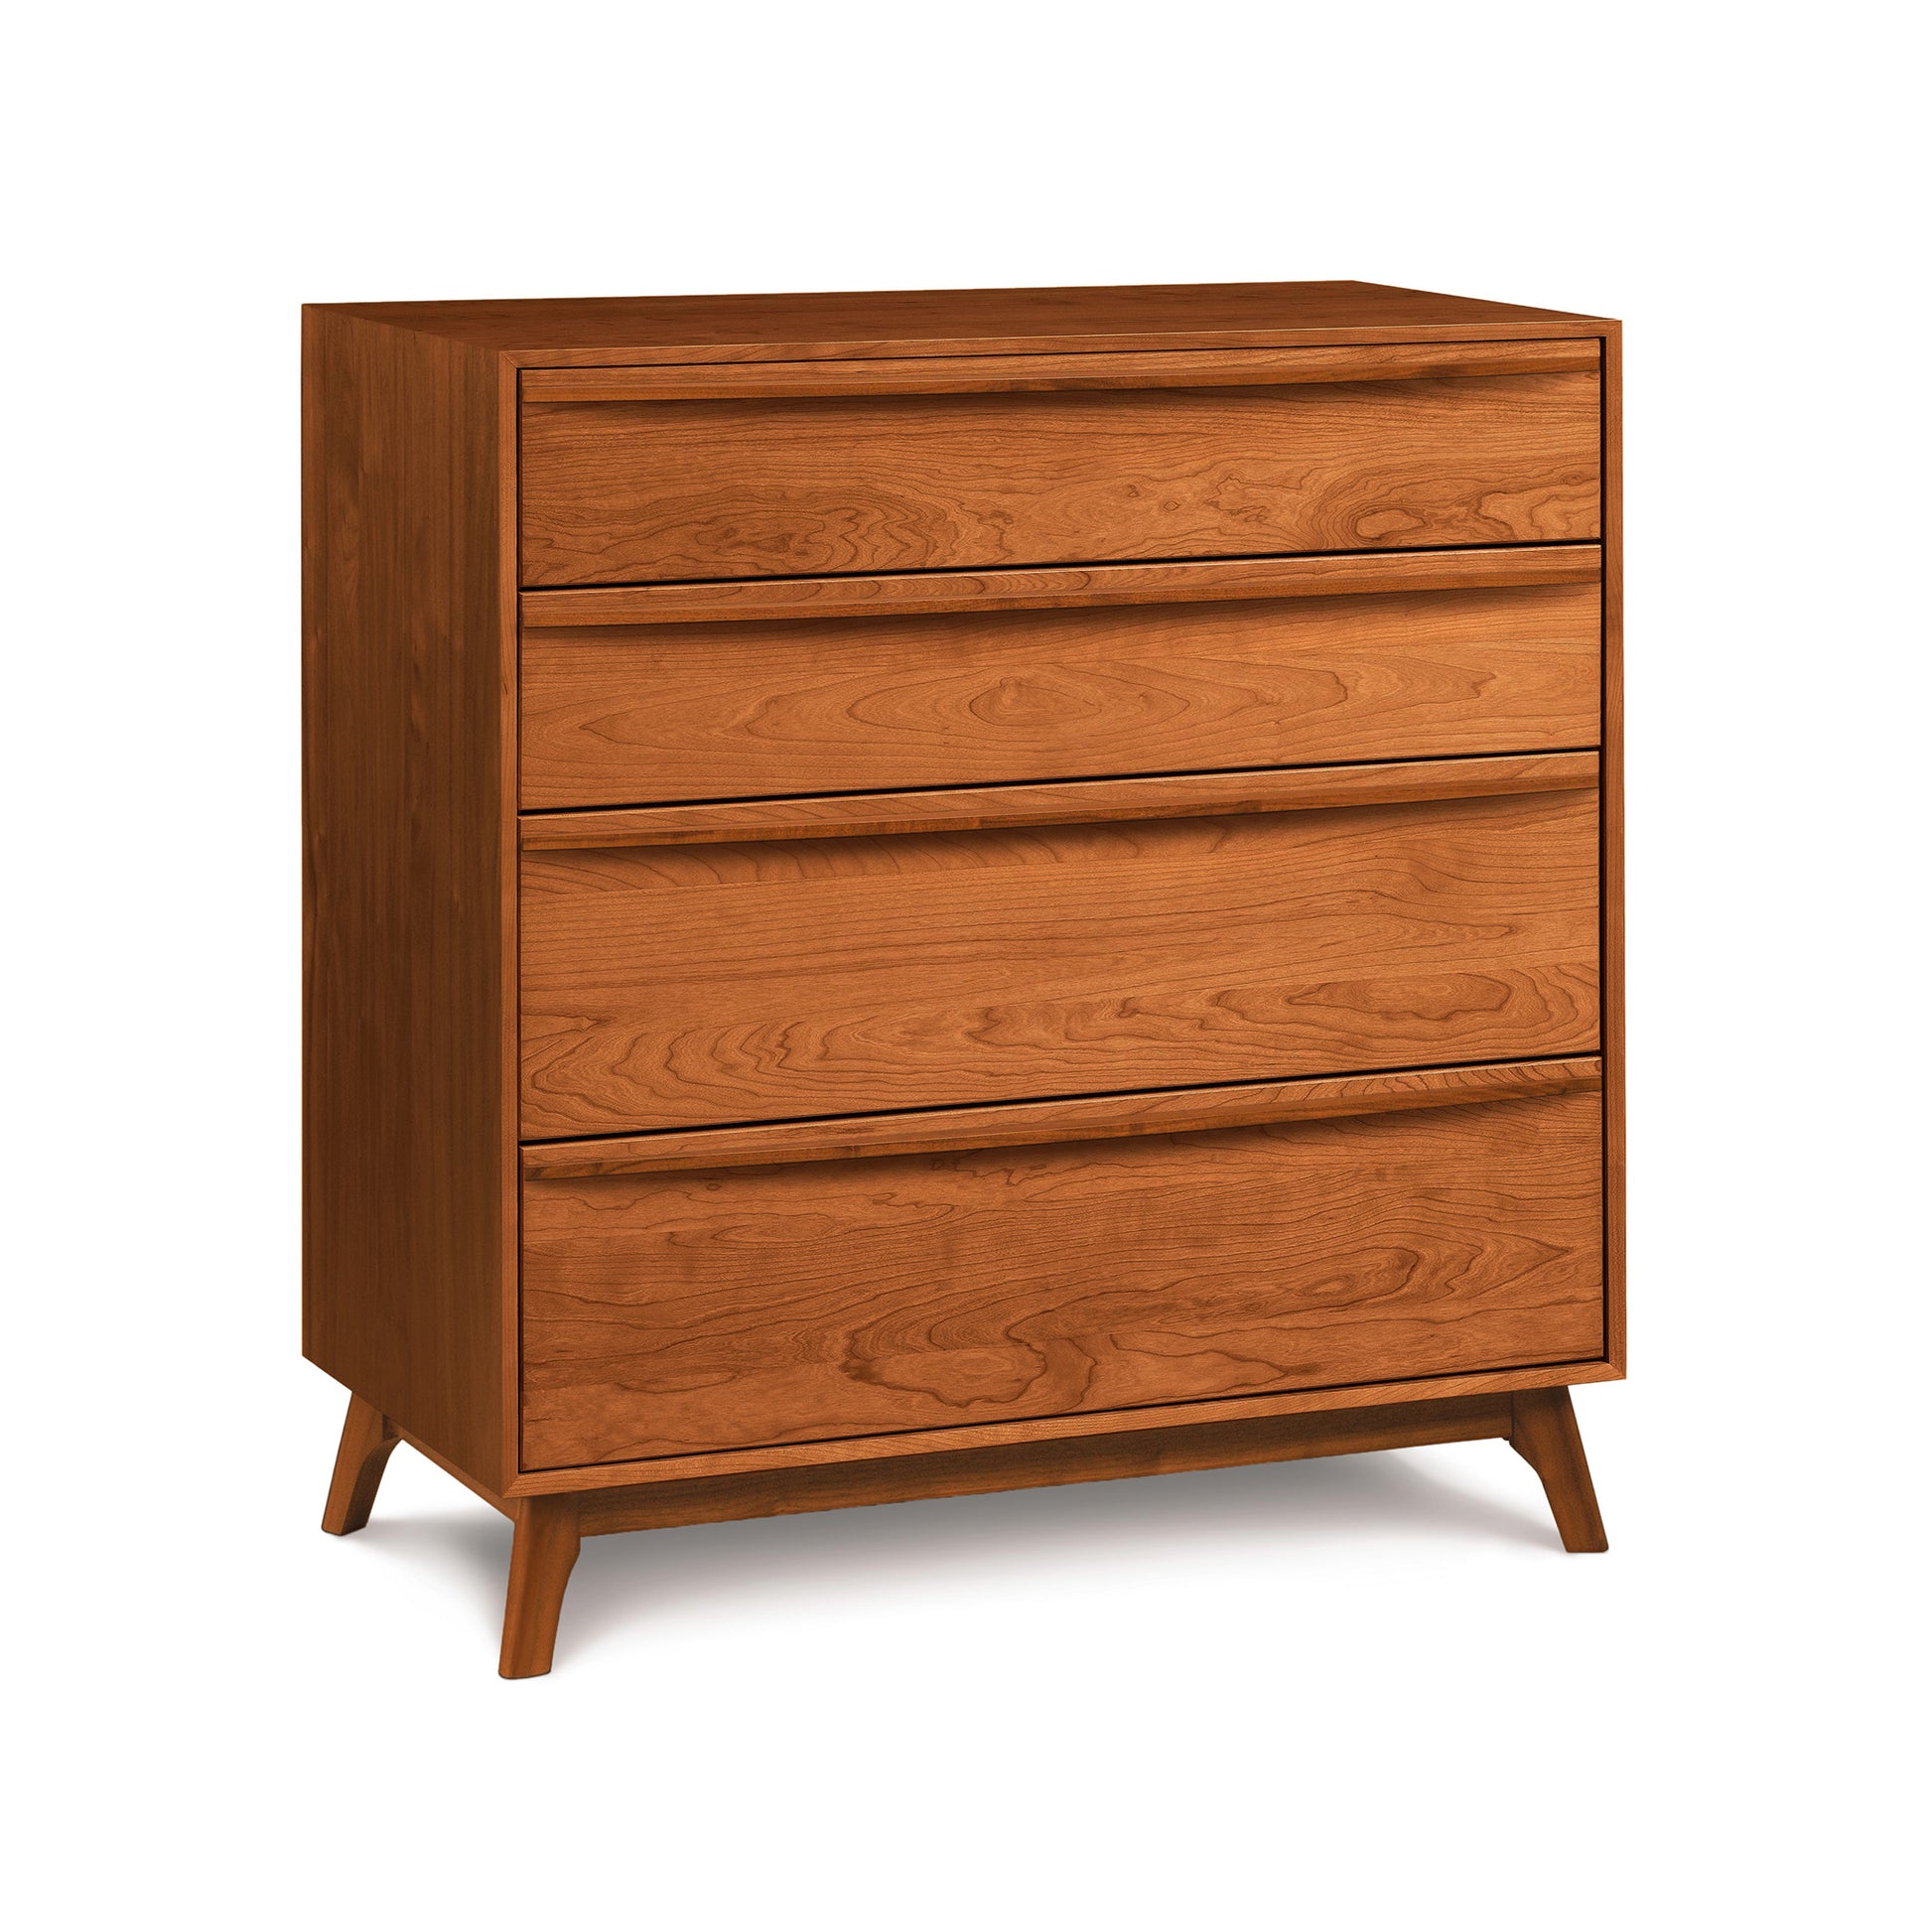 The Copeland Furniture Catalina 4-Drawer Chest, a modern wooden chest of drawers, handmade in Vermont.